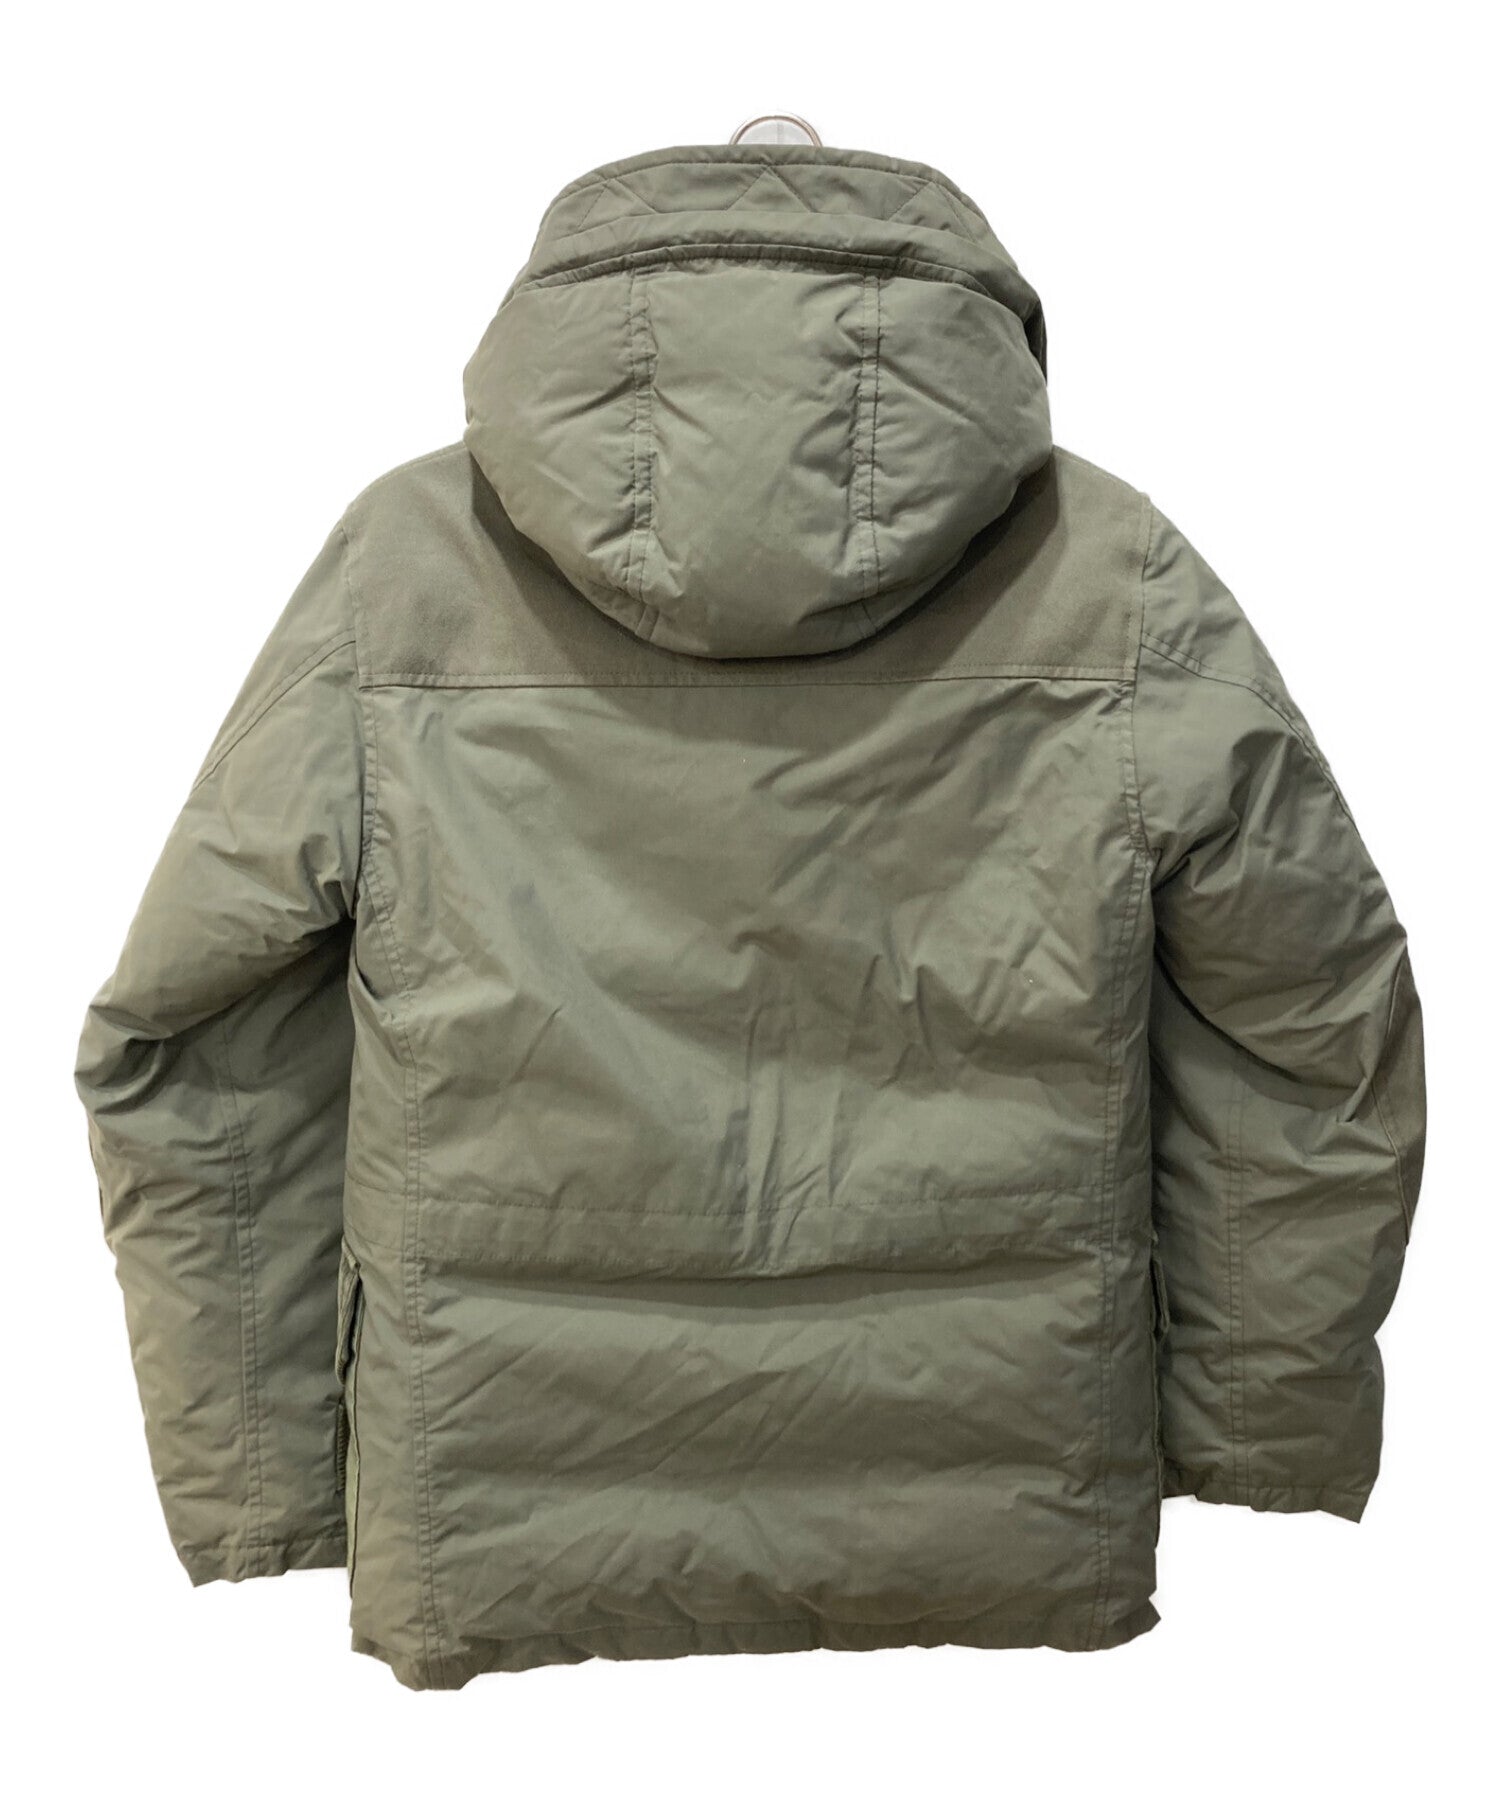 THE NORTH FACE×eYe COMME des GARCONS JUNYAWATANABE Collaboration